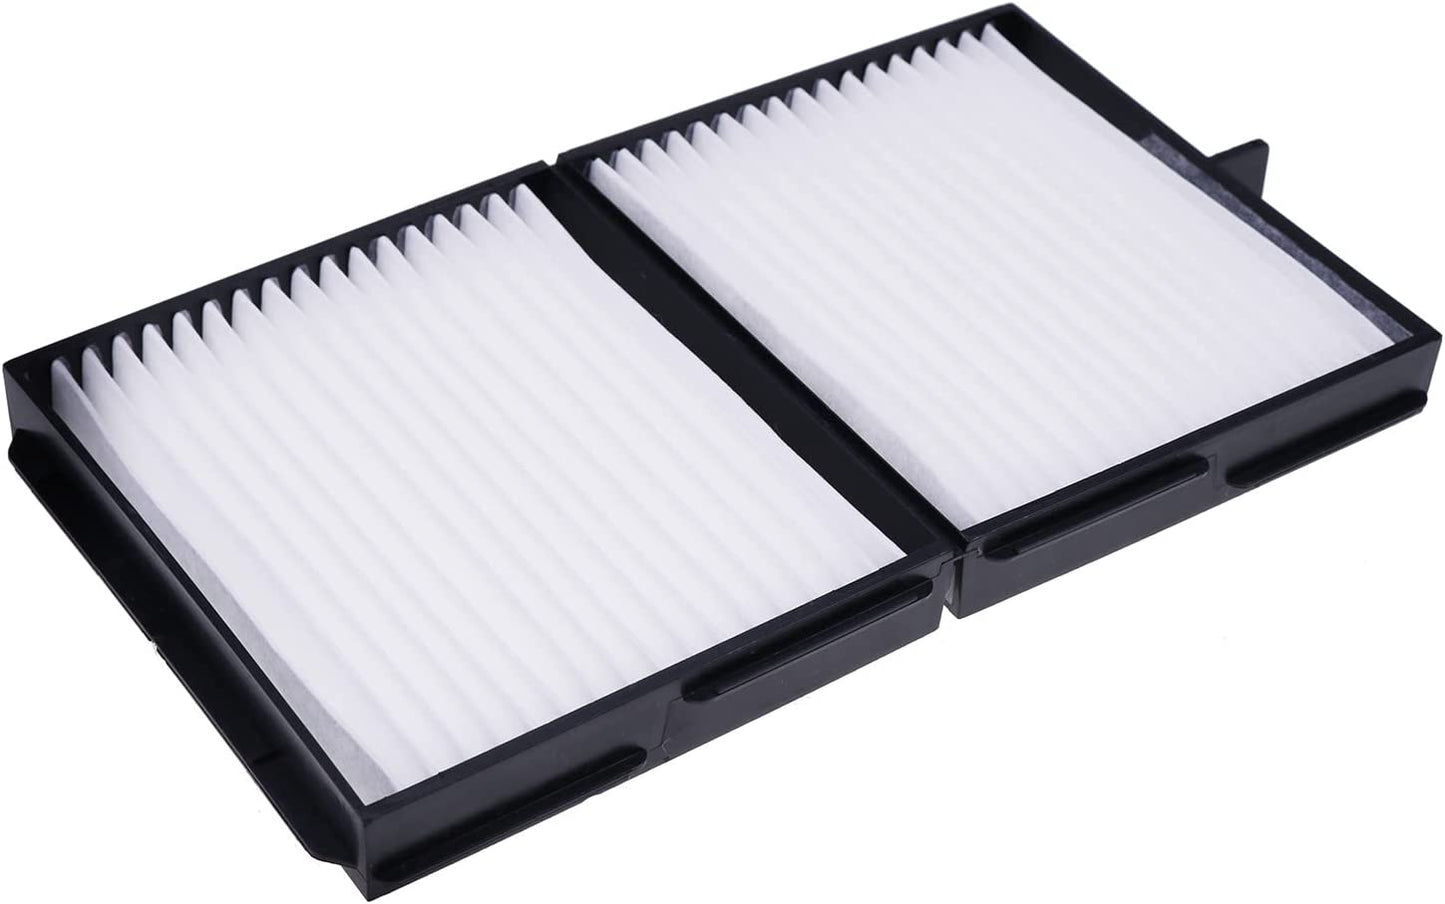 New Cabin Air Filter 20Y-979-6261 20Y-979-6261-A Compatible with Komatsu D155A-6 D155AX-5 D41E-6 D41P-6